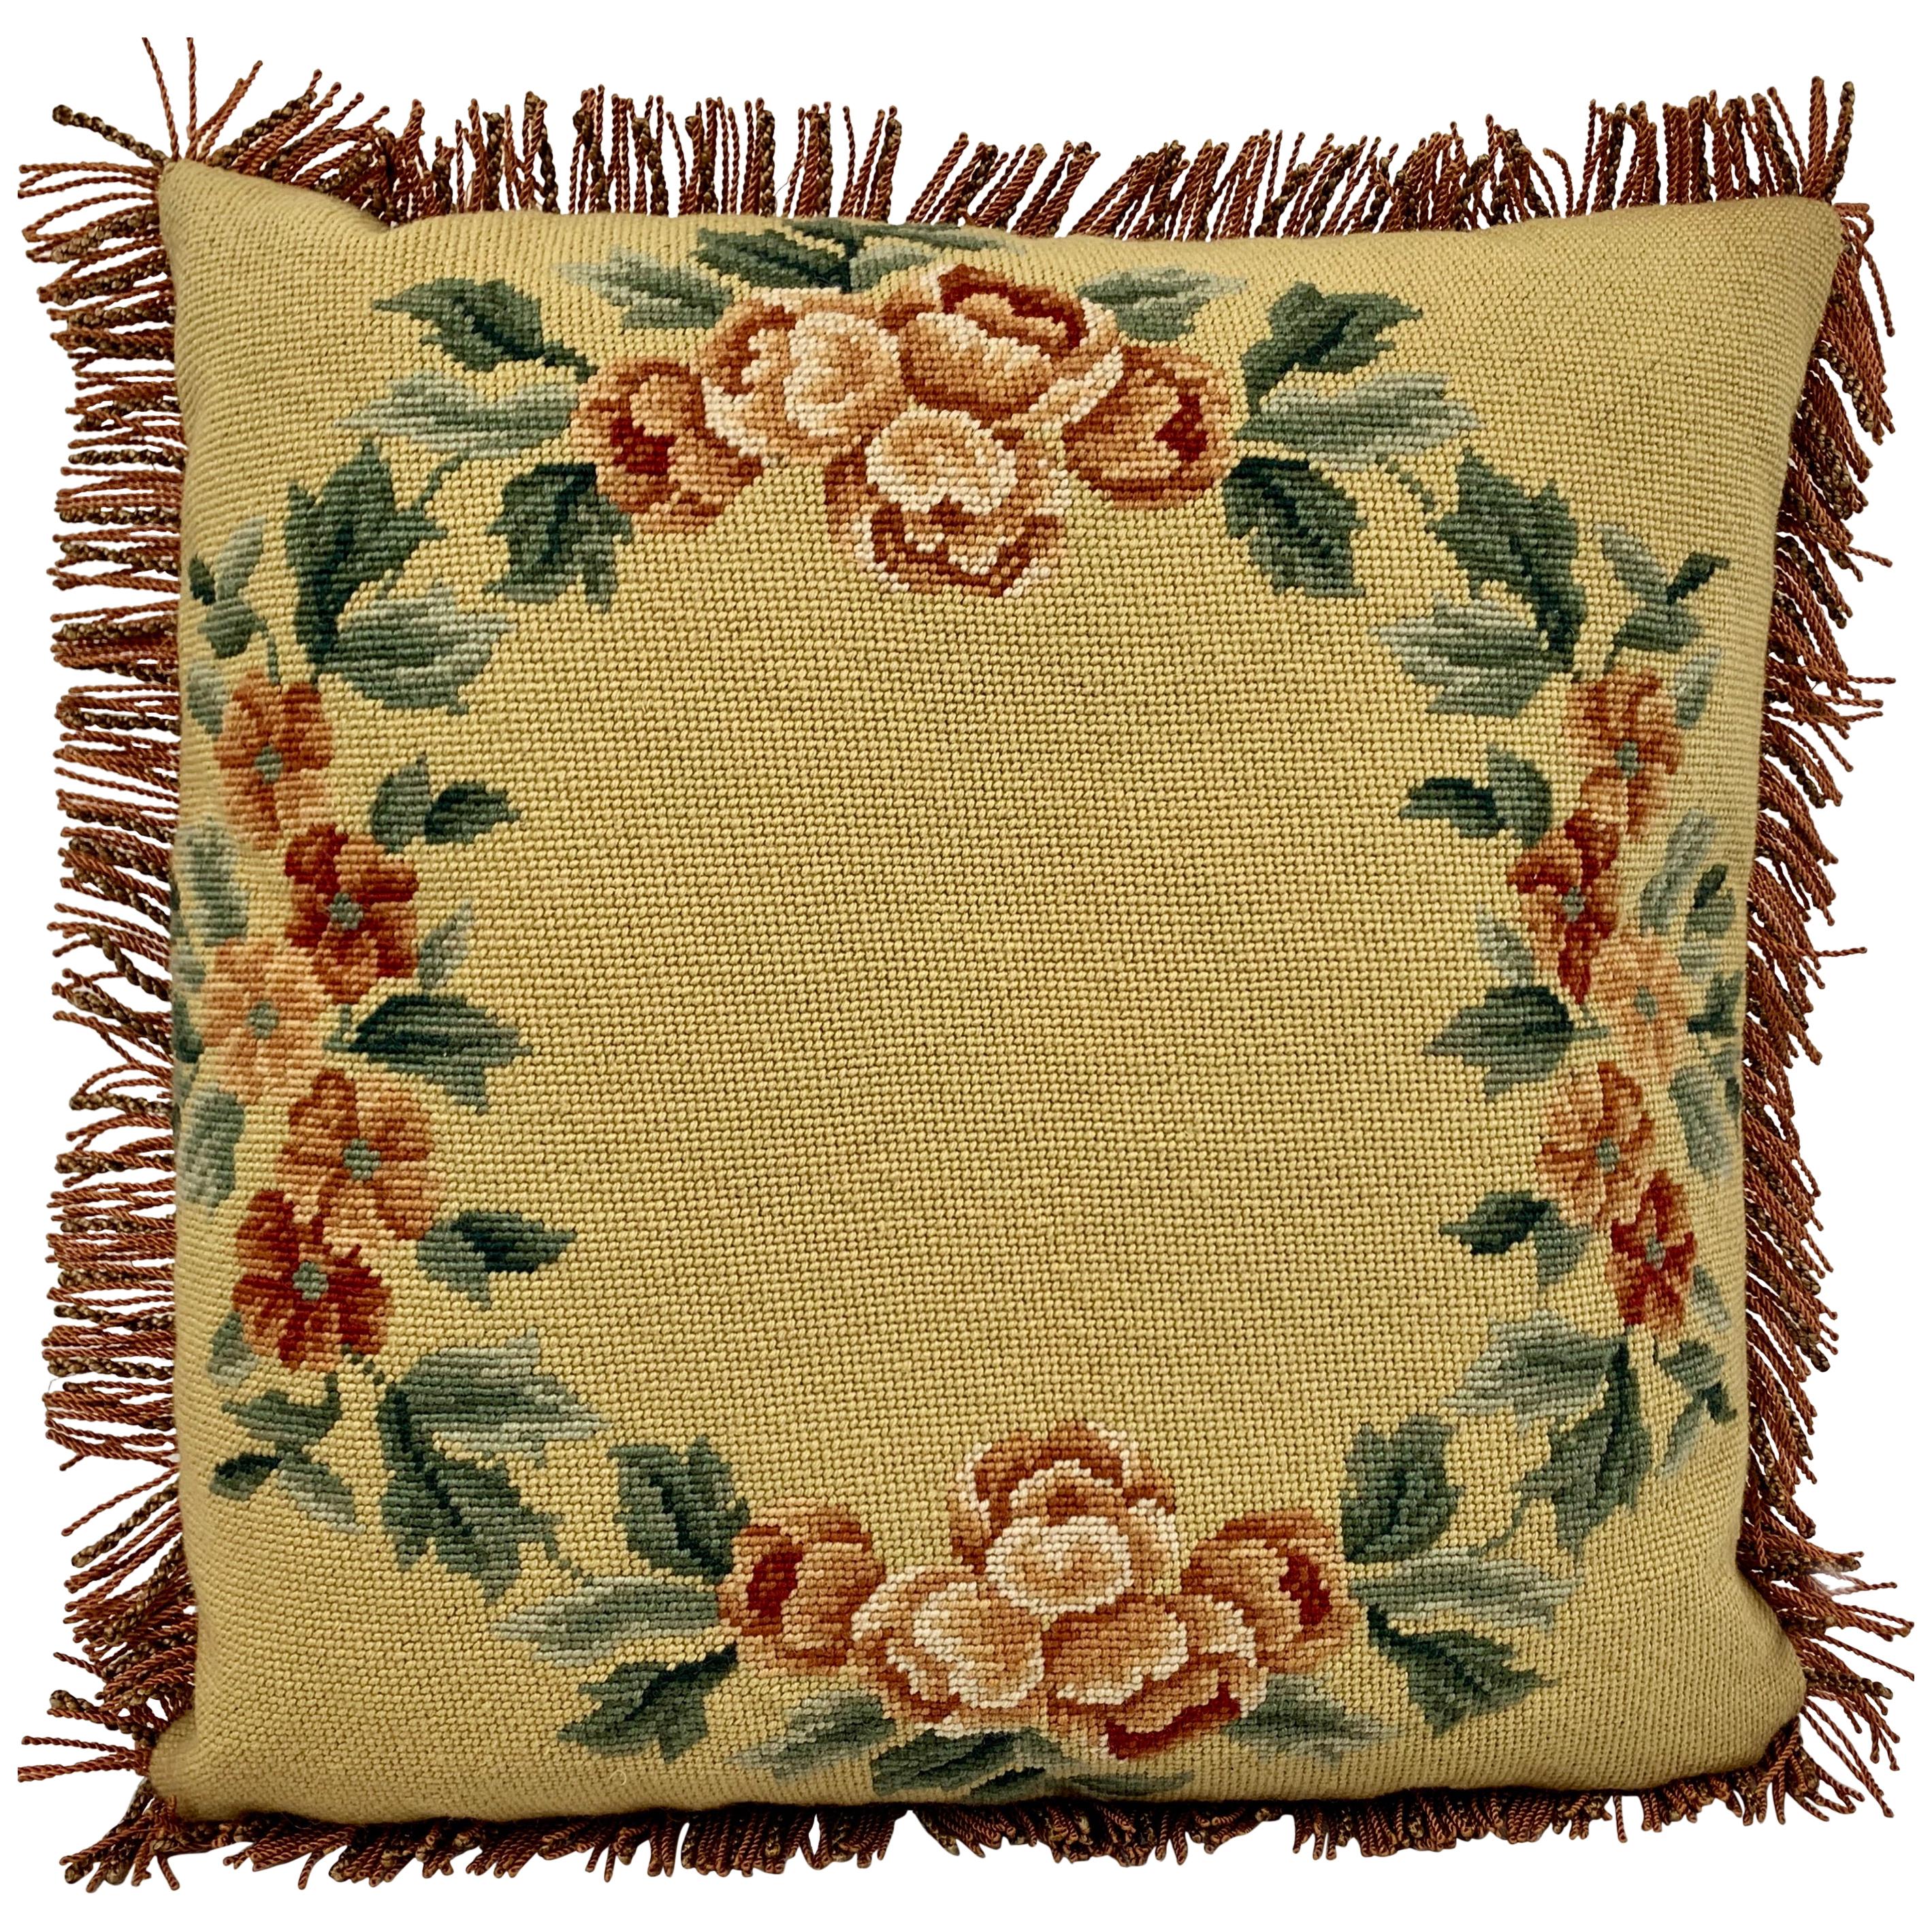 Hand Needlepointed Cushion/Pillow with Decorative Floral Motif & Fringed Border